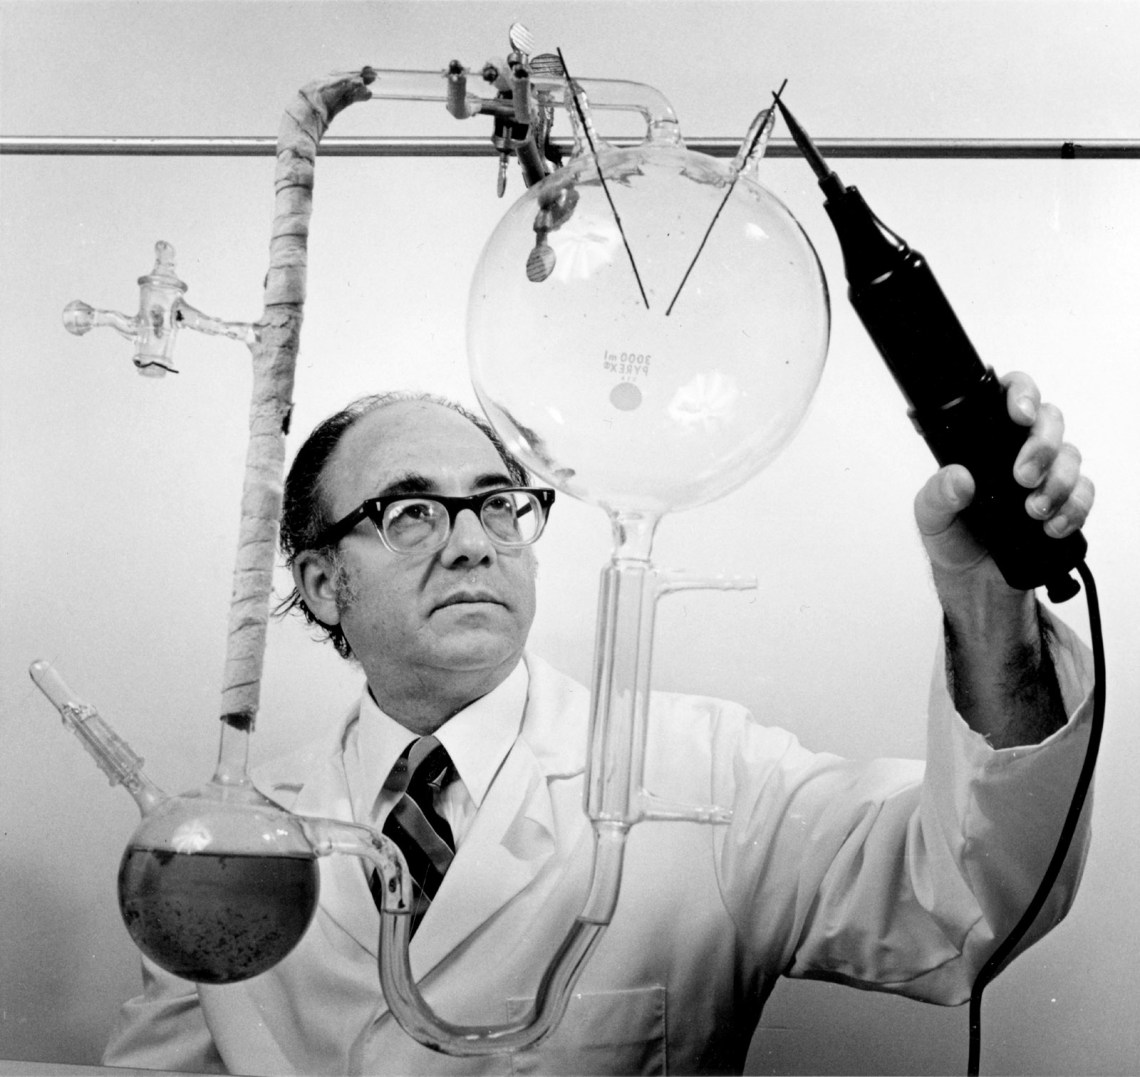 Stanley Miller conducting the Miller-Urey Experiment, designed to test the idea that the fundamental elements of life could be assembled in a ‘primordial soup’